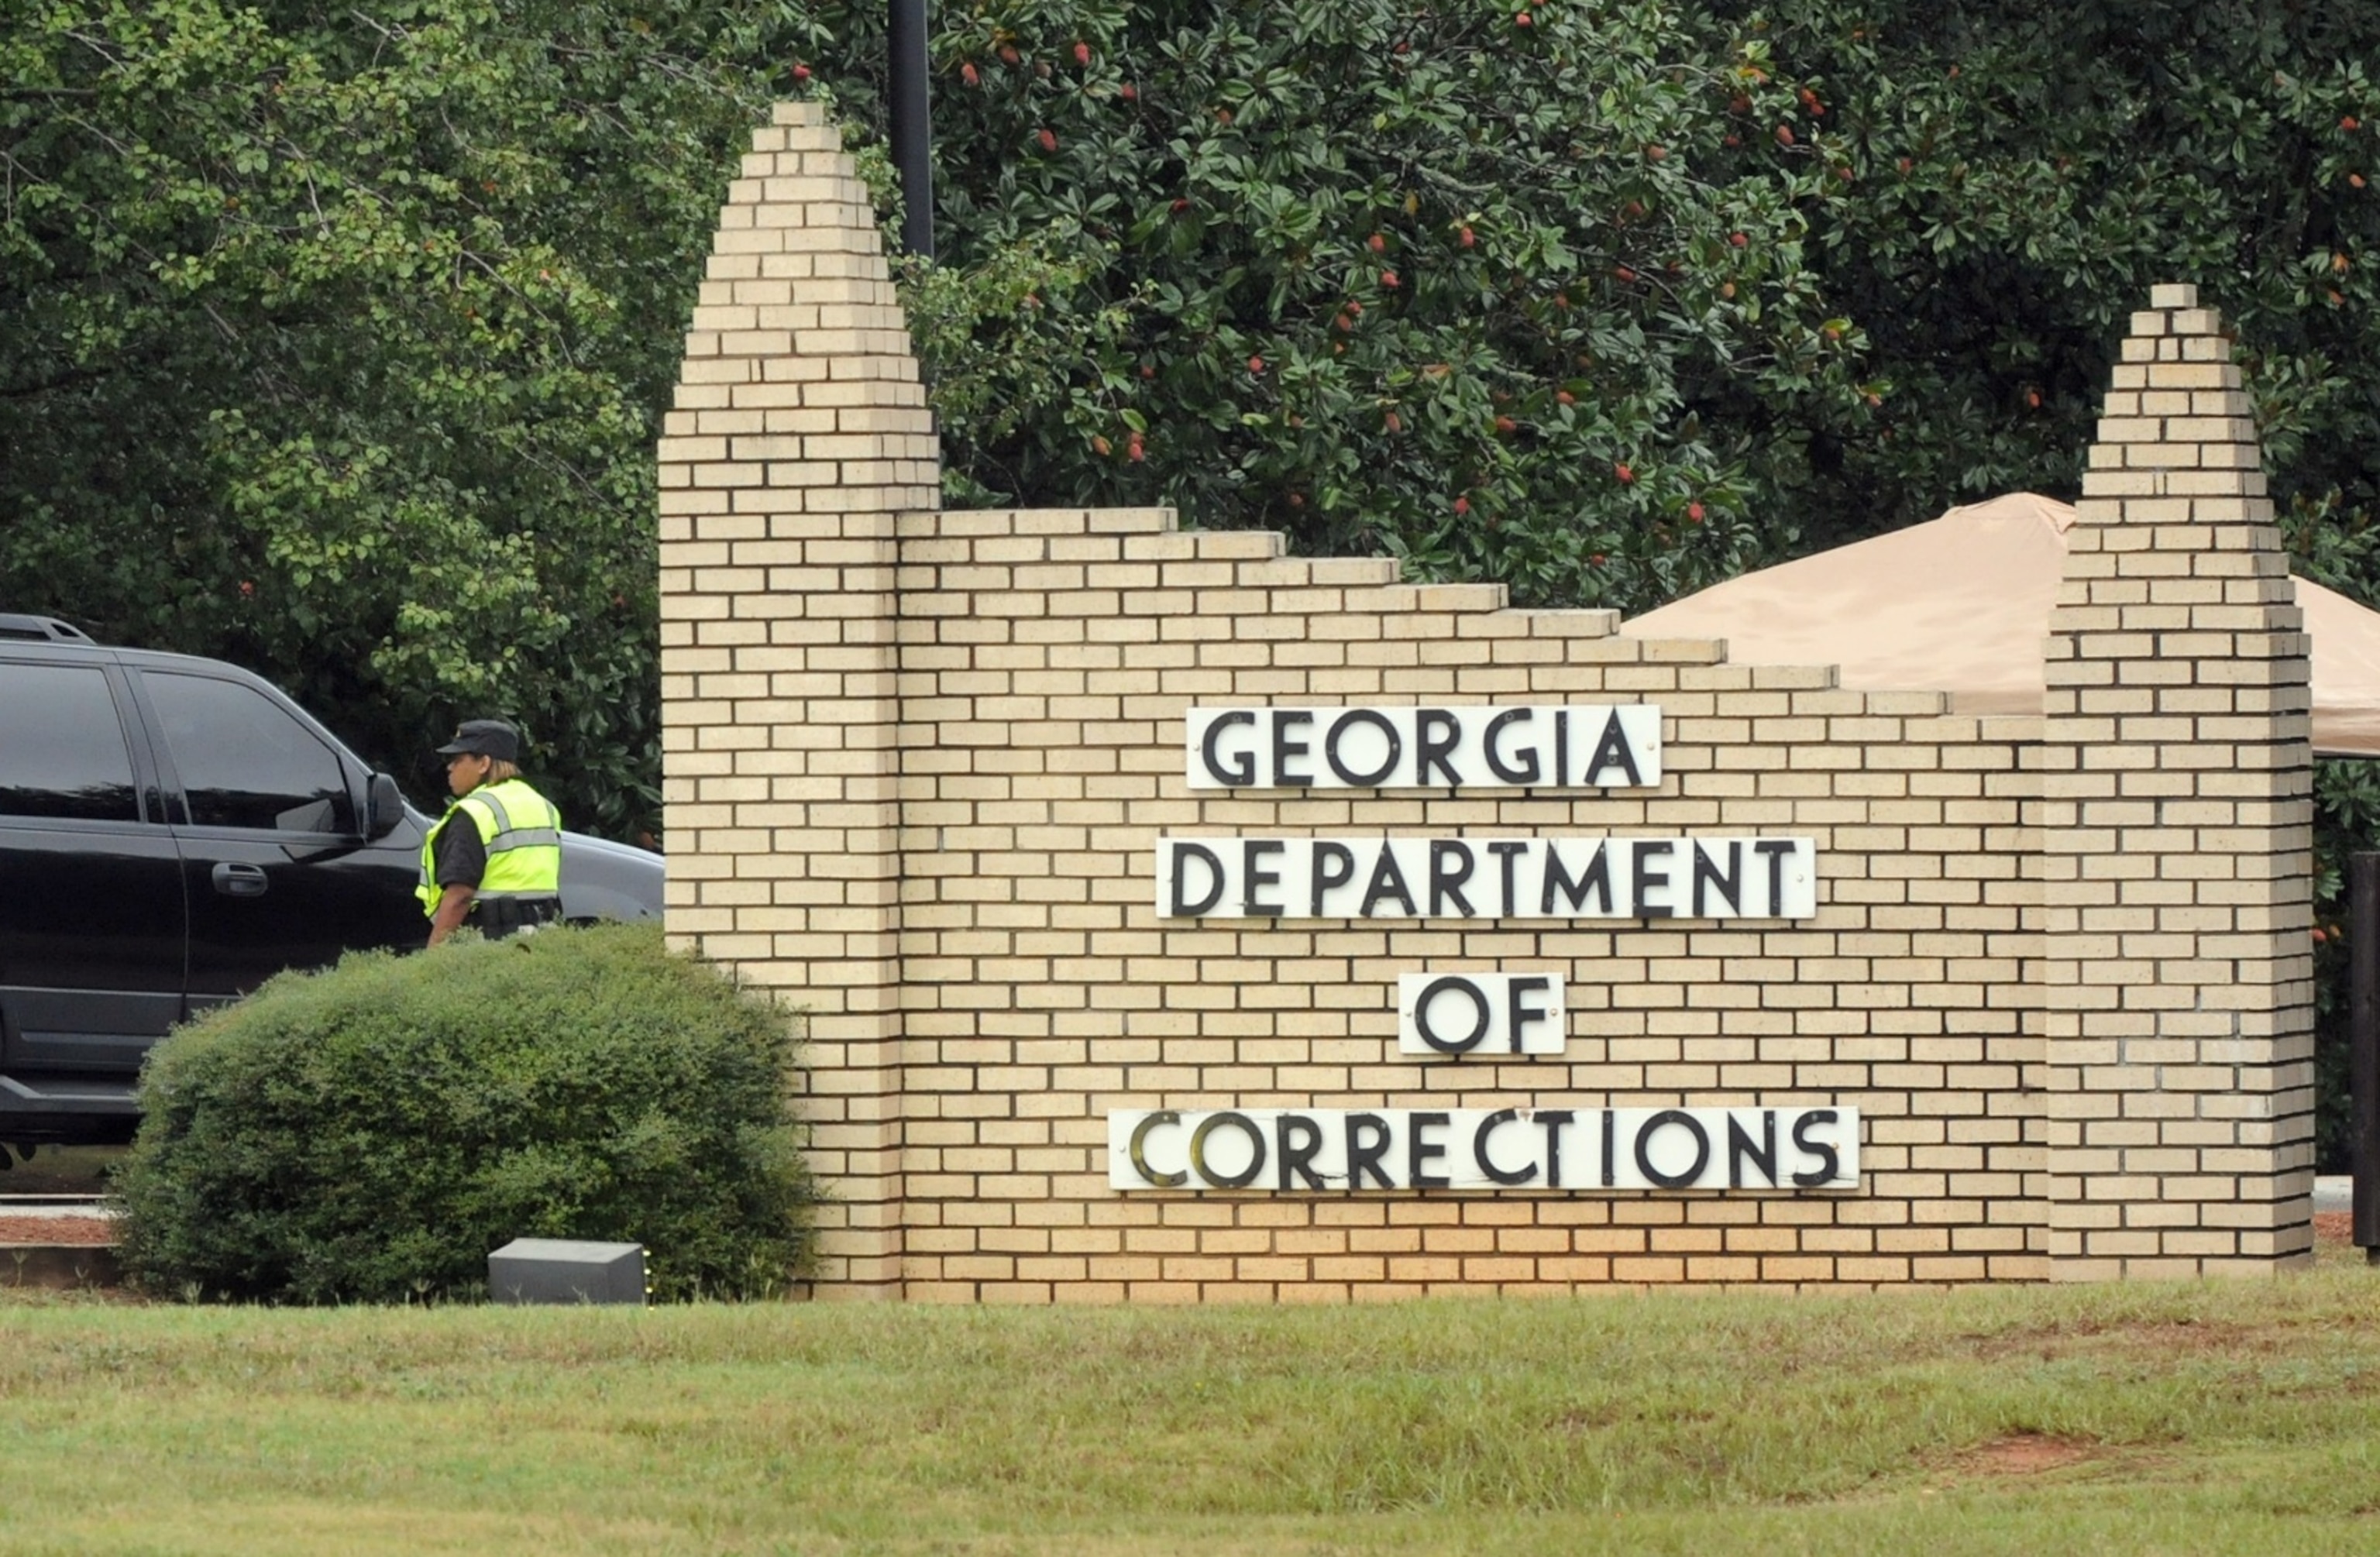 PHOTO: In this Sept. 20, 2011, file photo, officers with the Georgia Department of Corrections check a vehicle at the entrance to the Georgia Diagnostic and Classification Prison, in Jackson, Georgia.